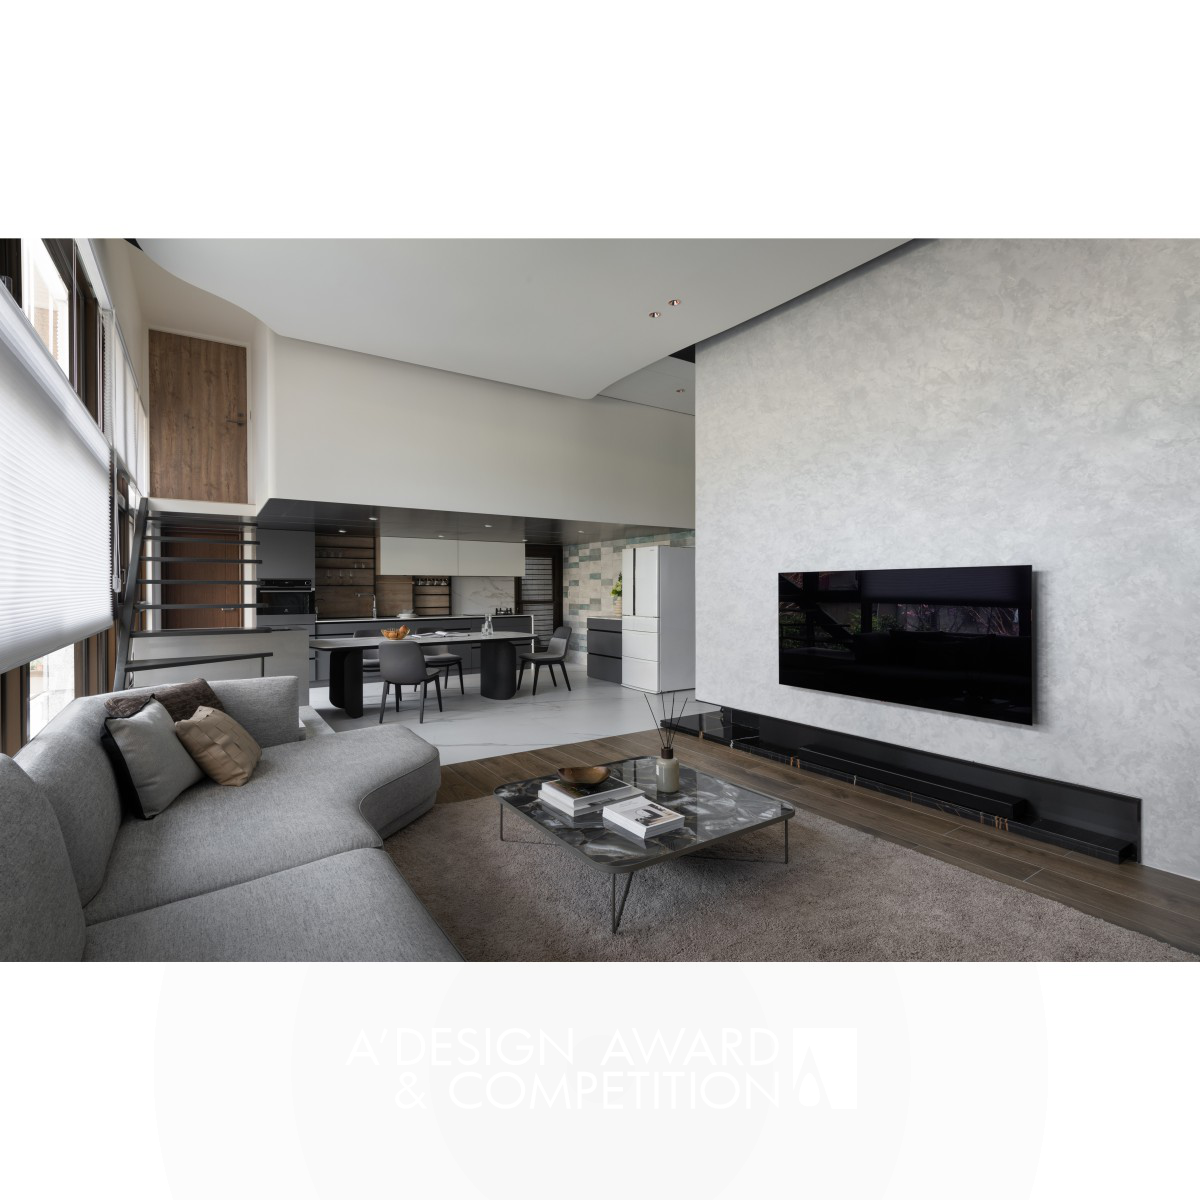 Grayscale The Transition of Elegance Residential Apartment by Rong Ruei Tian